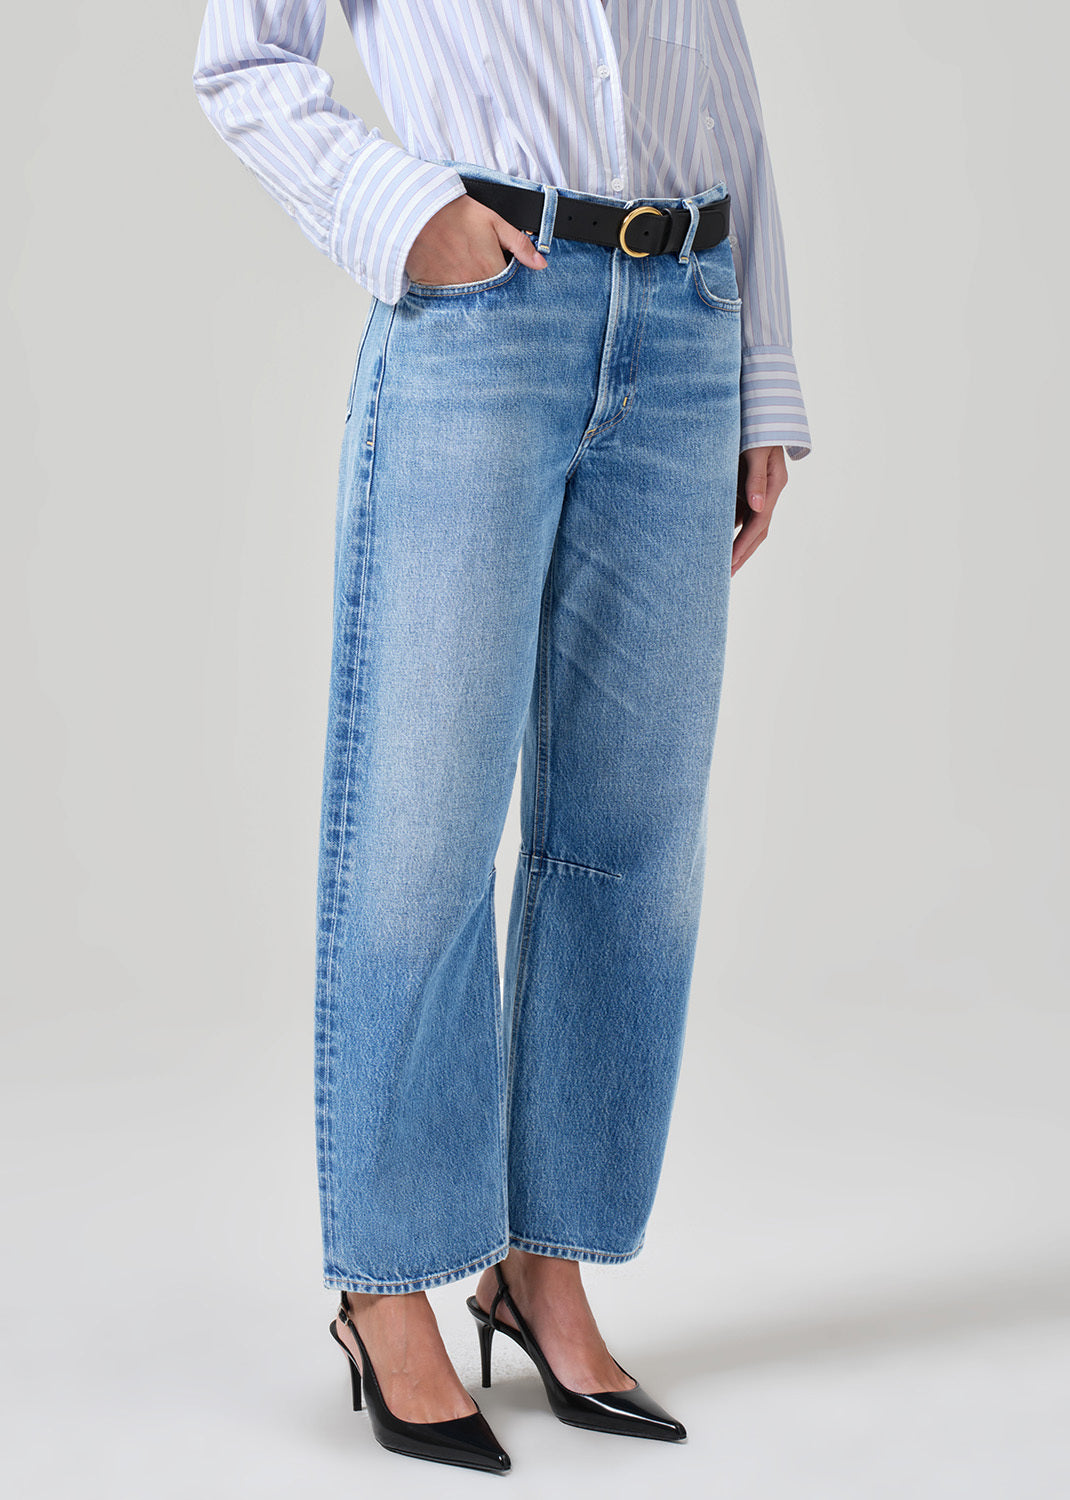 Miro Relaxed Jean in Pacifica front